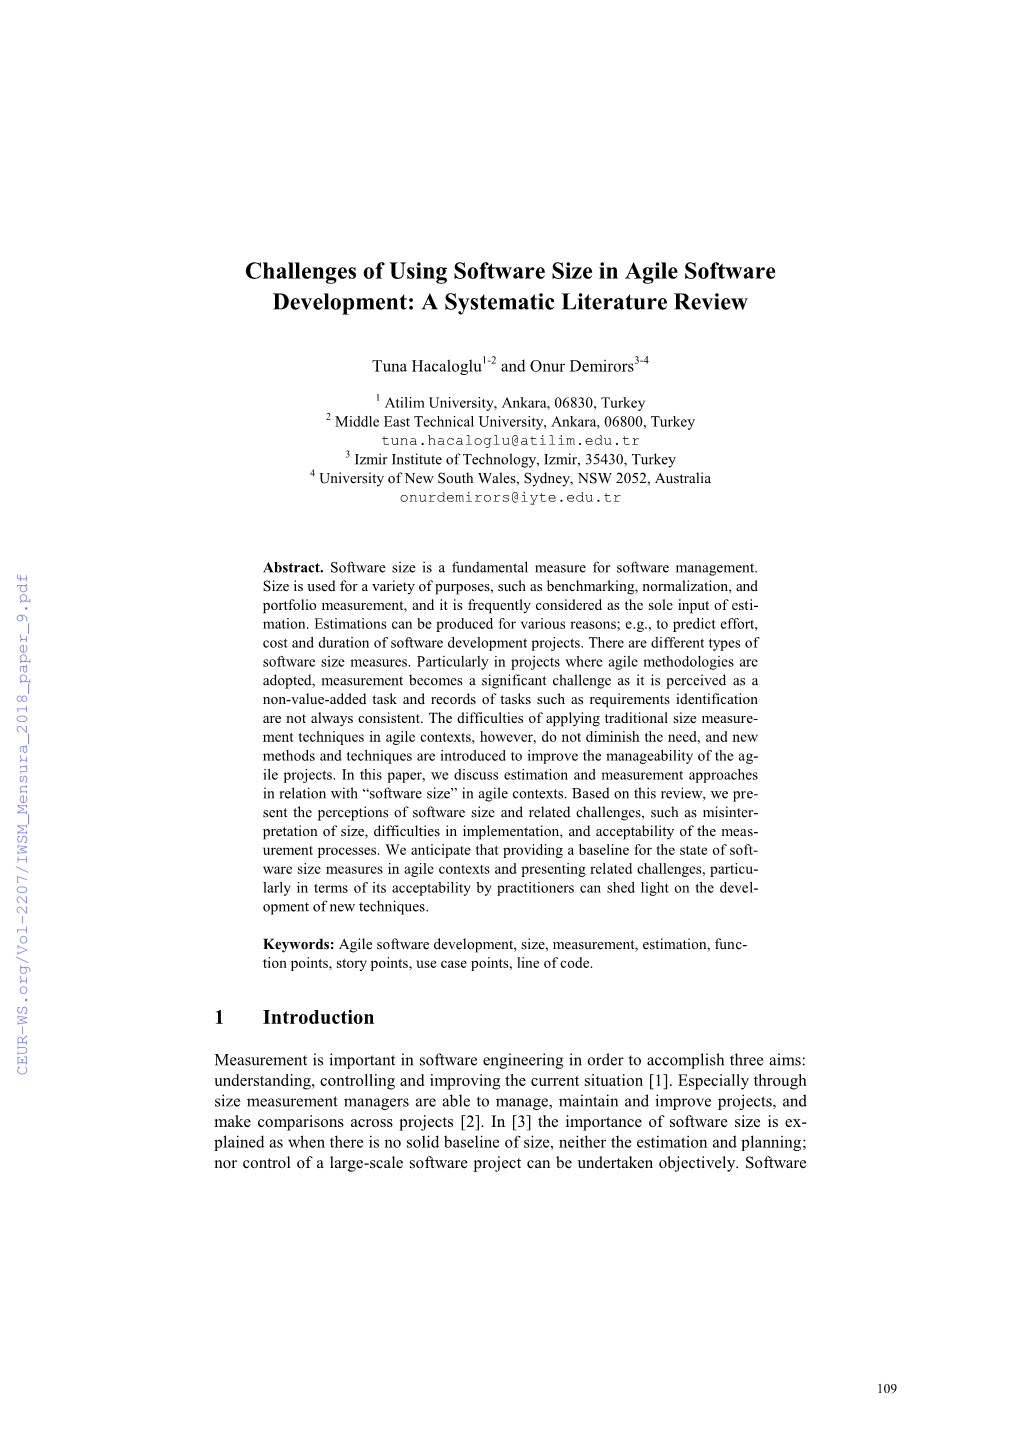 Challenges of Using Software Size in Agile Software Development: a Systematic Literature Review